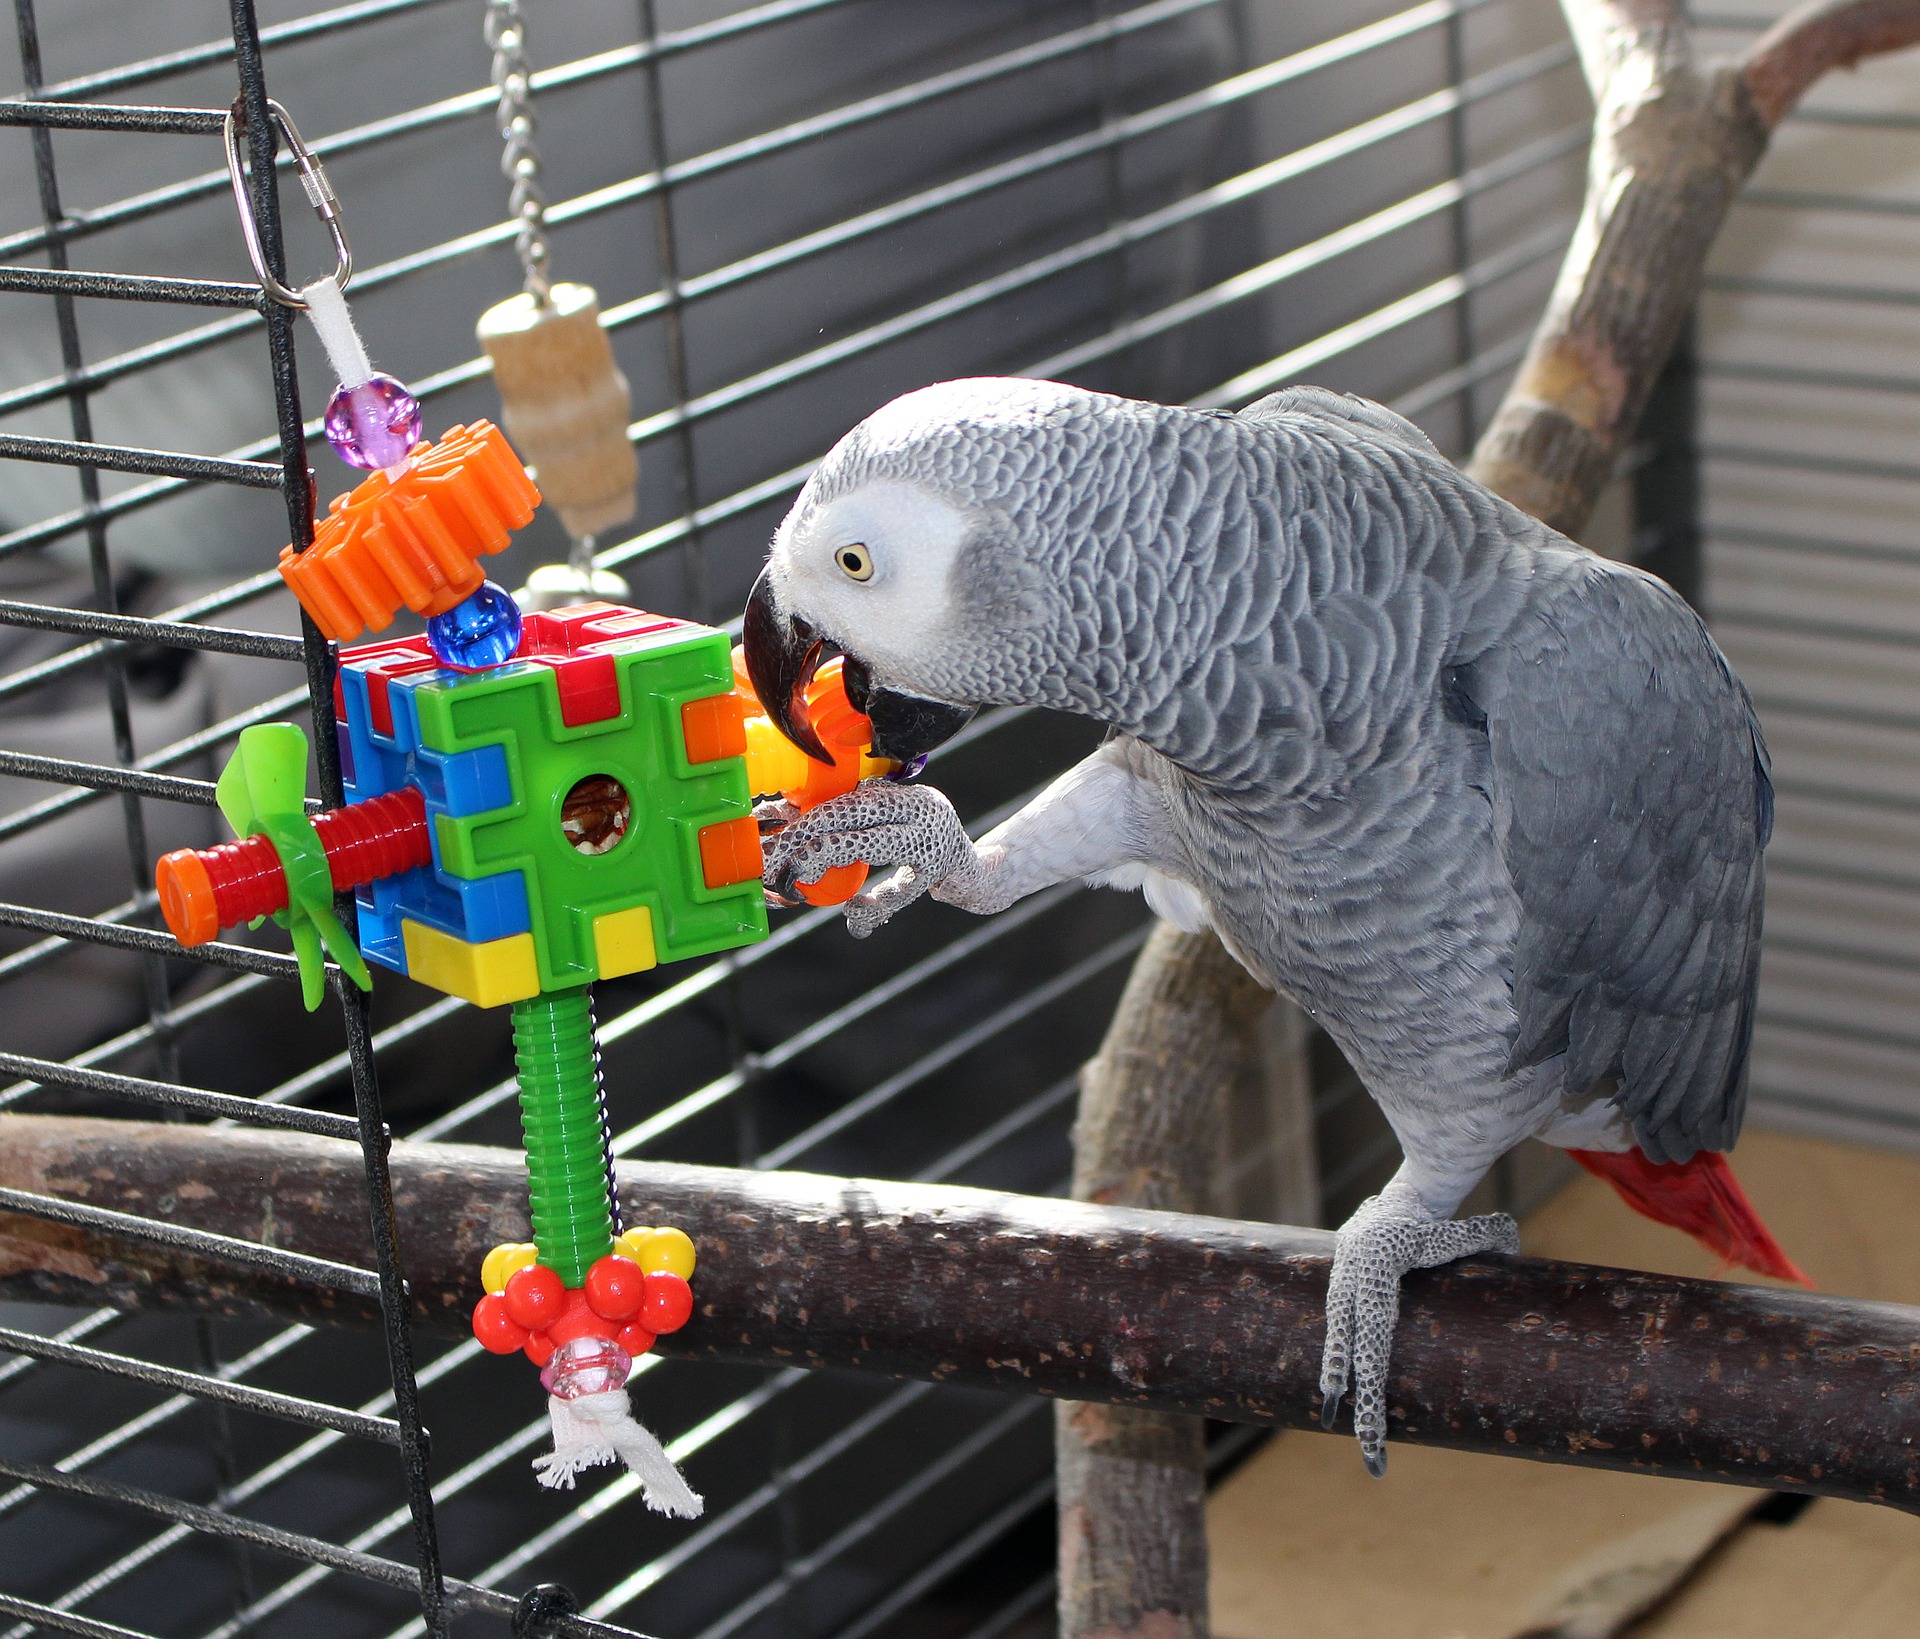 A parrot in a cage with a foraging toy